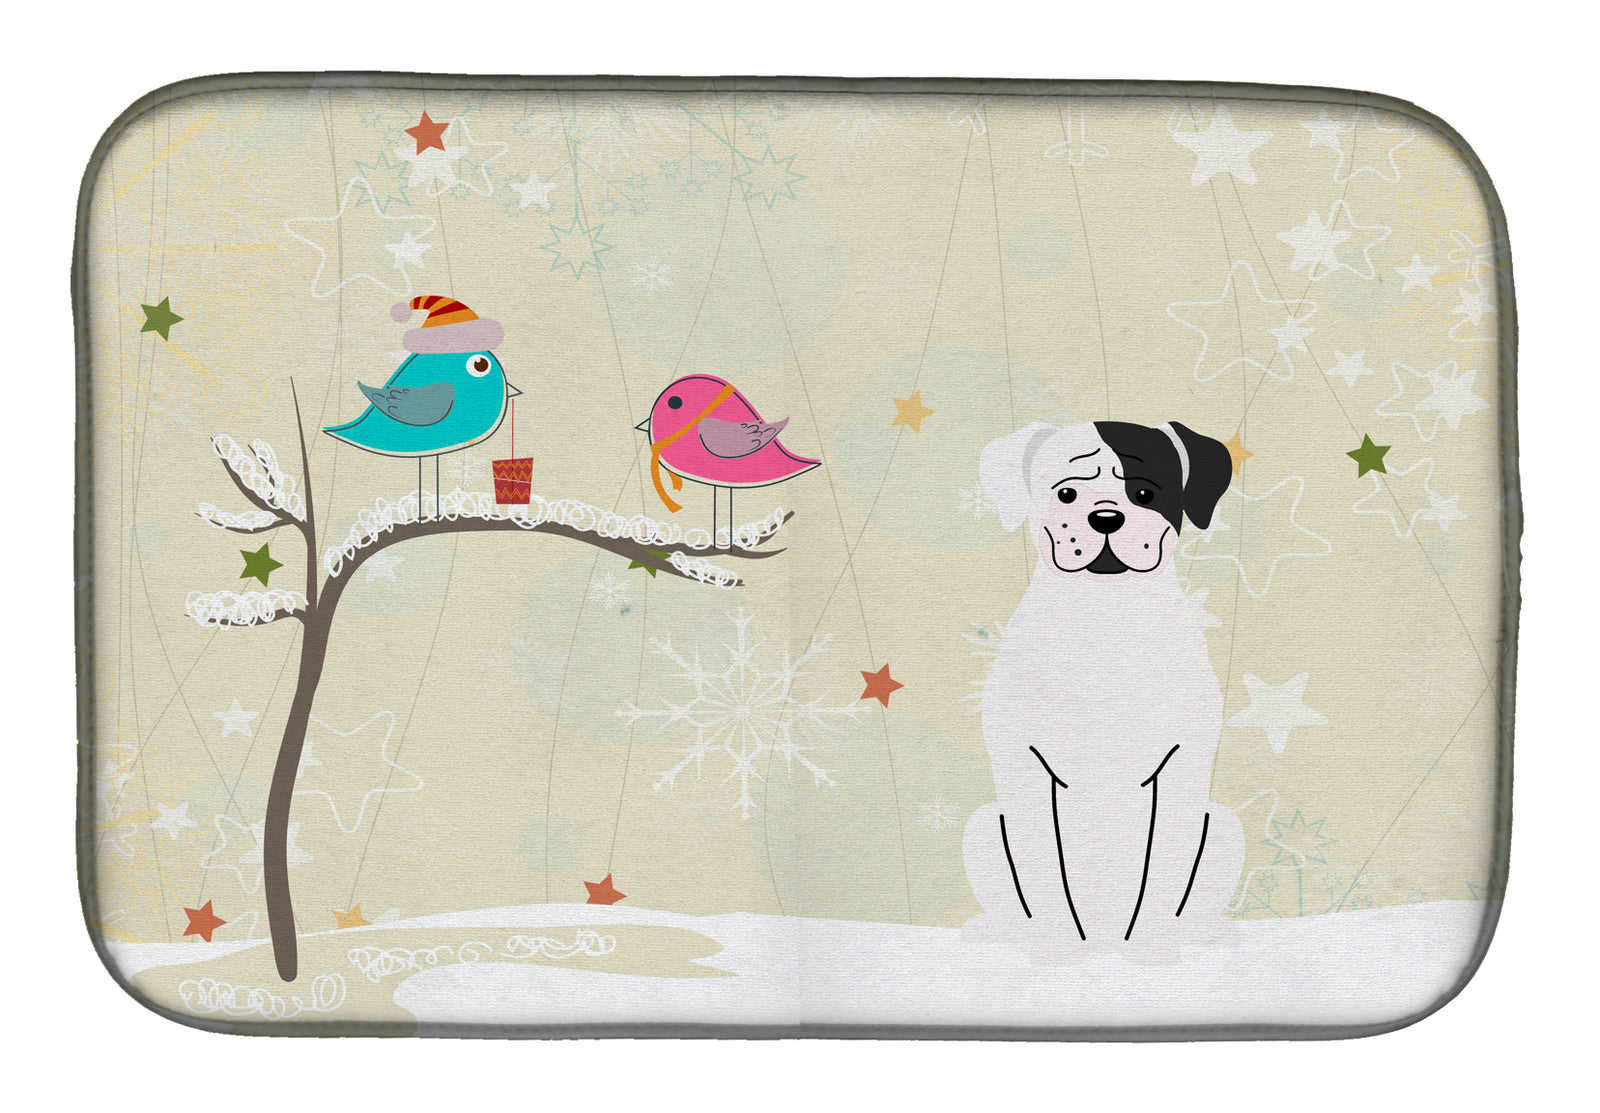 Christmas Presents between Friends White Boxer Cooper Dish Drying Mat BB2586DDM